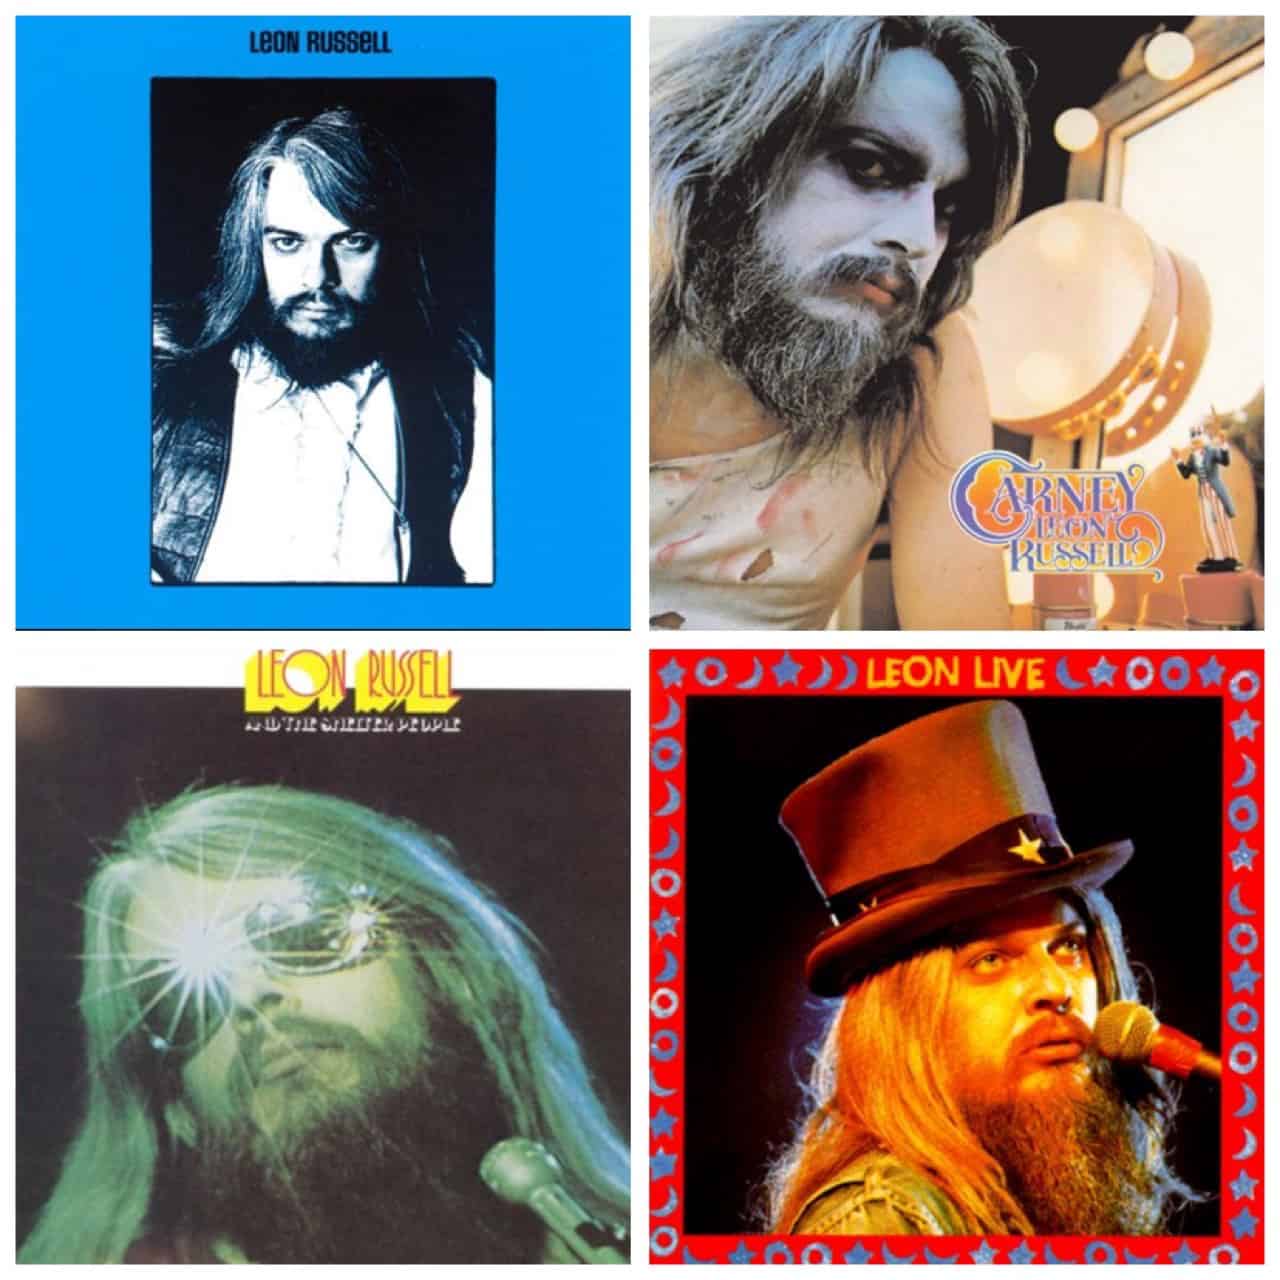 Cover artwork of Leon Russell's early solo albums.